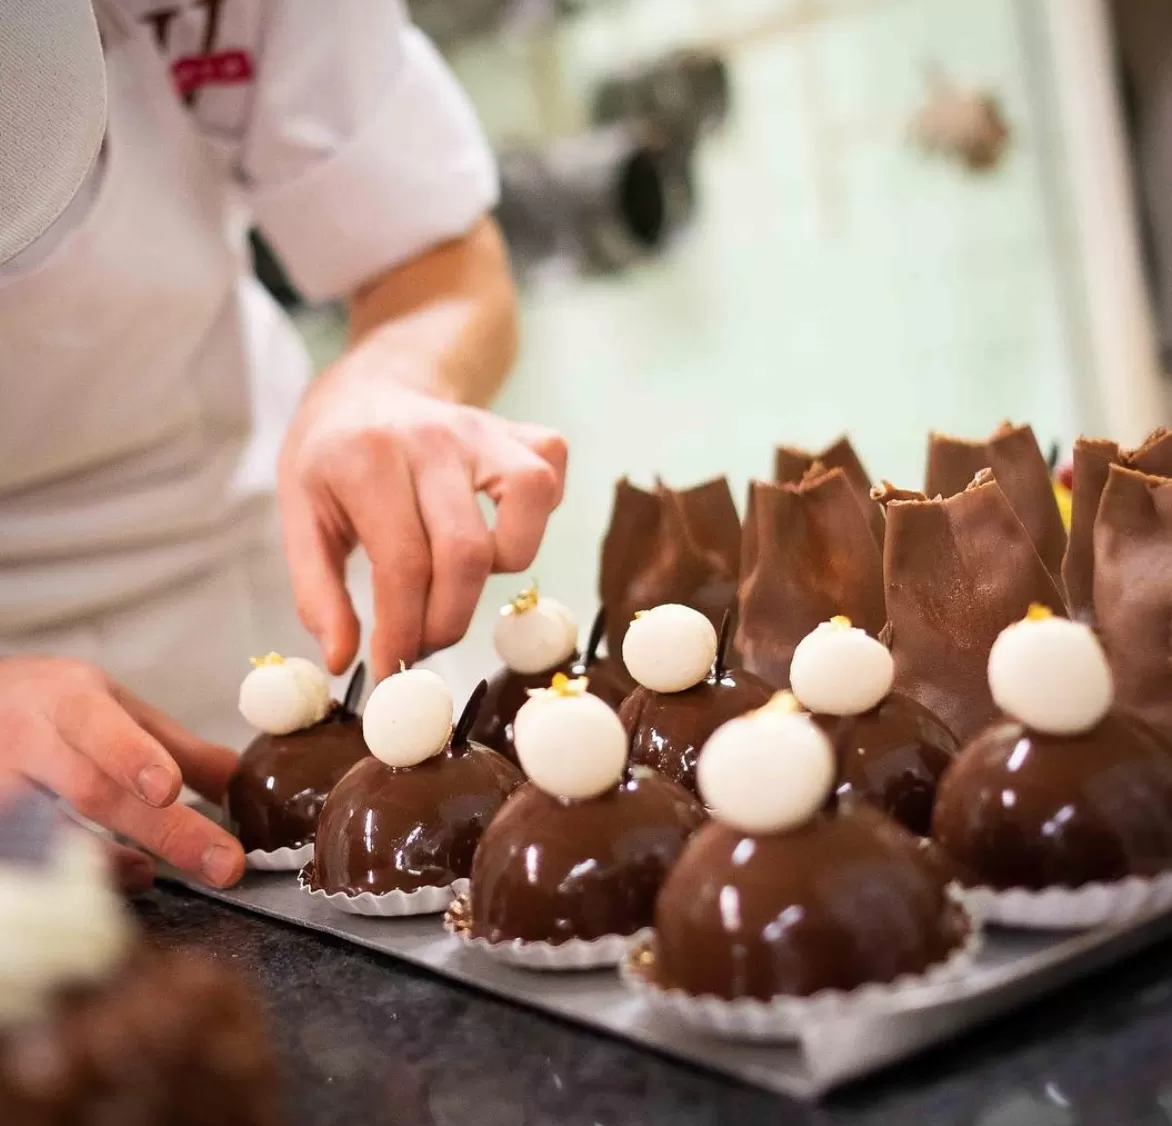 9 chocolate shops in Brussels you shouldn’t miss